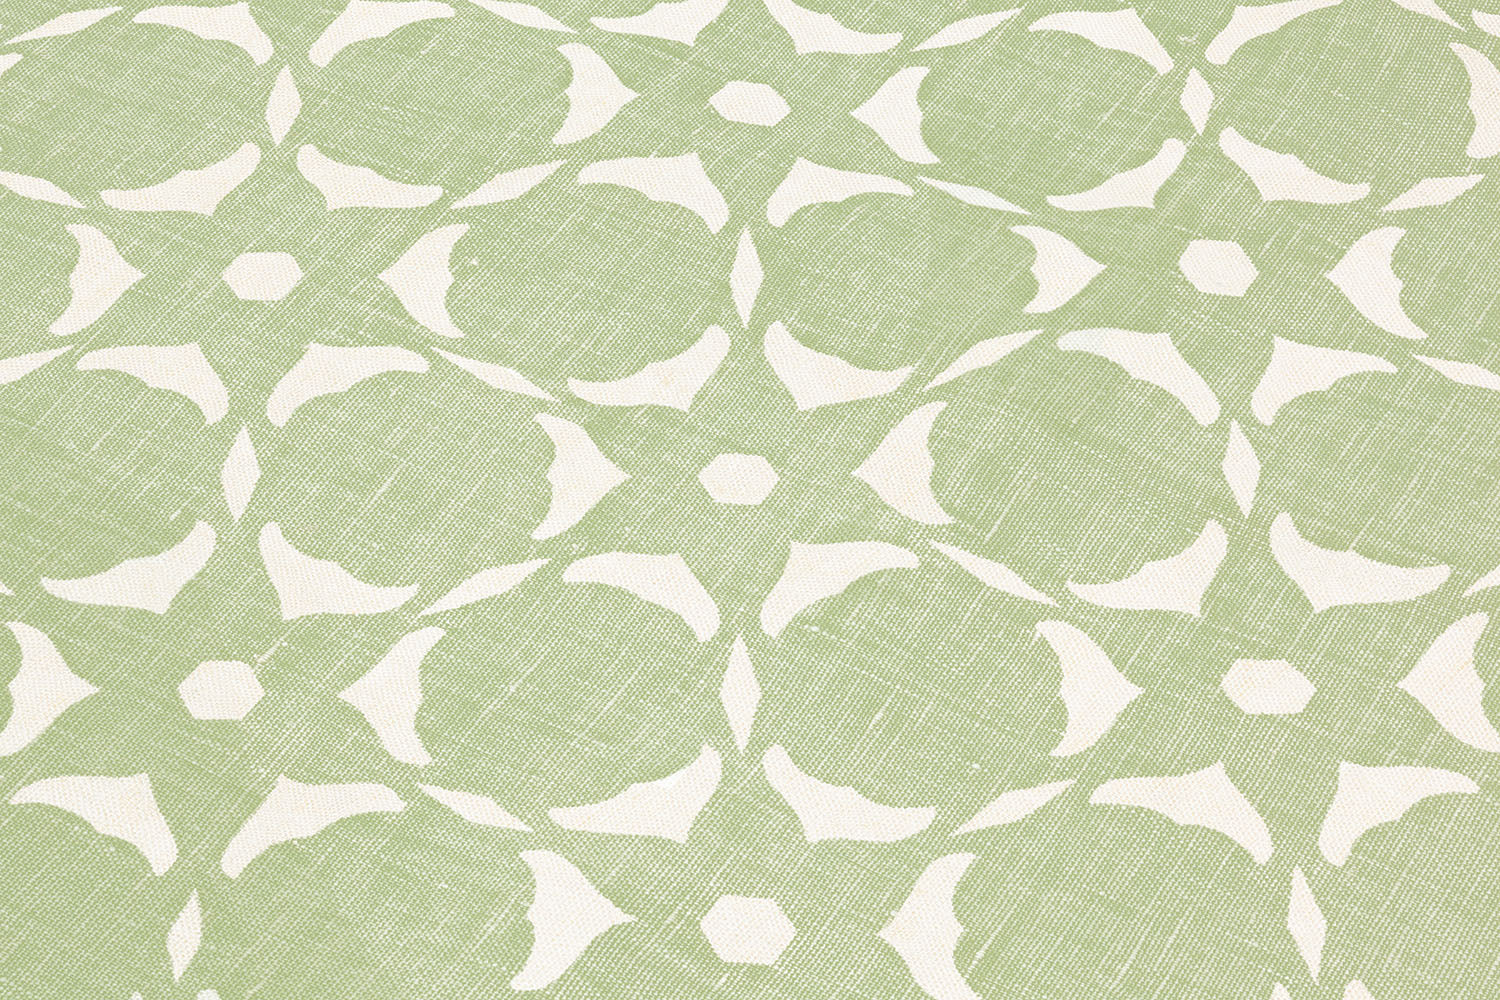 Fabric yardage in a floral lattice print in white on a light green field.